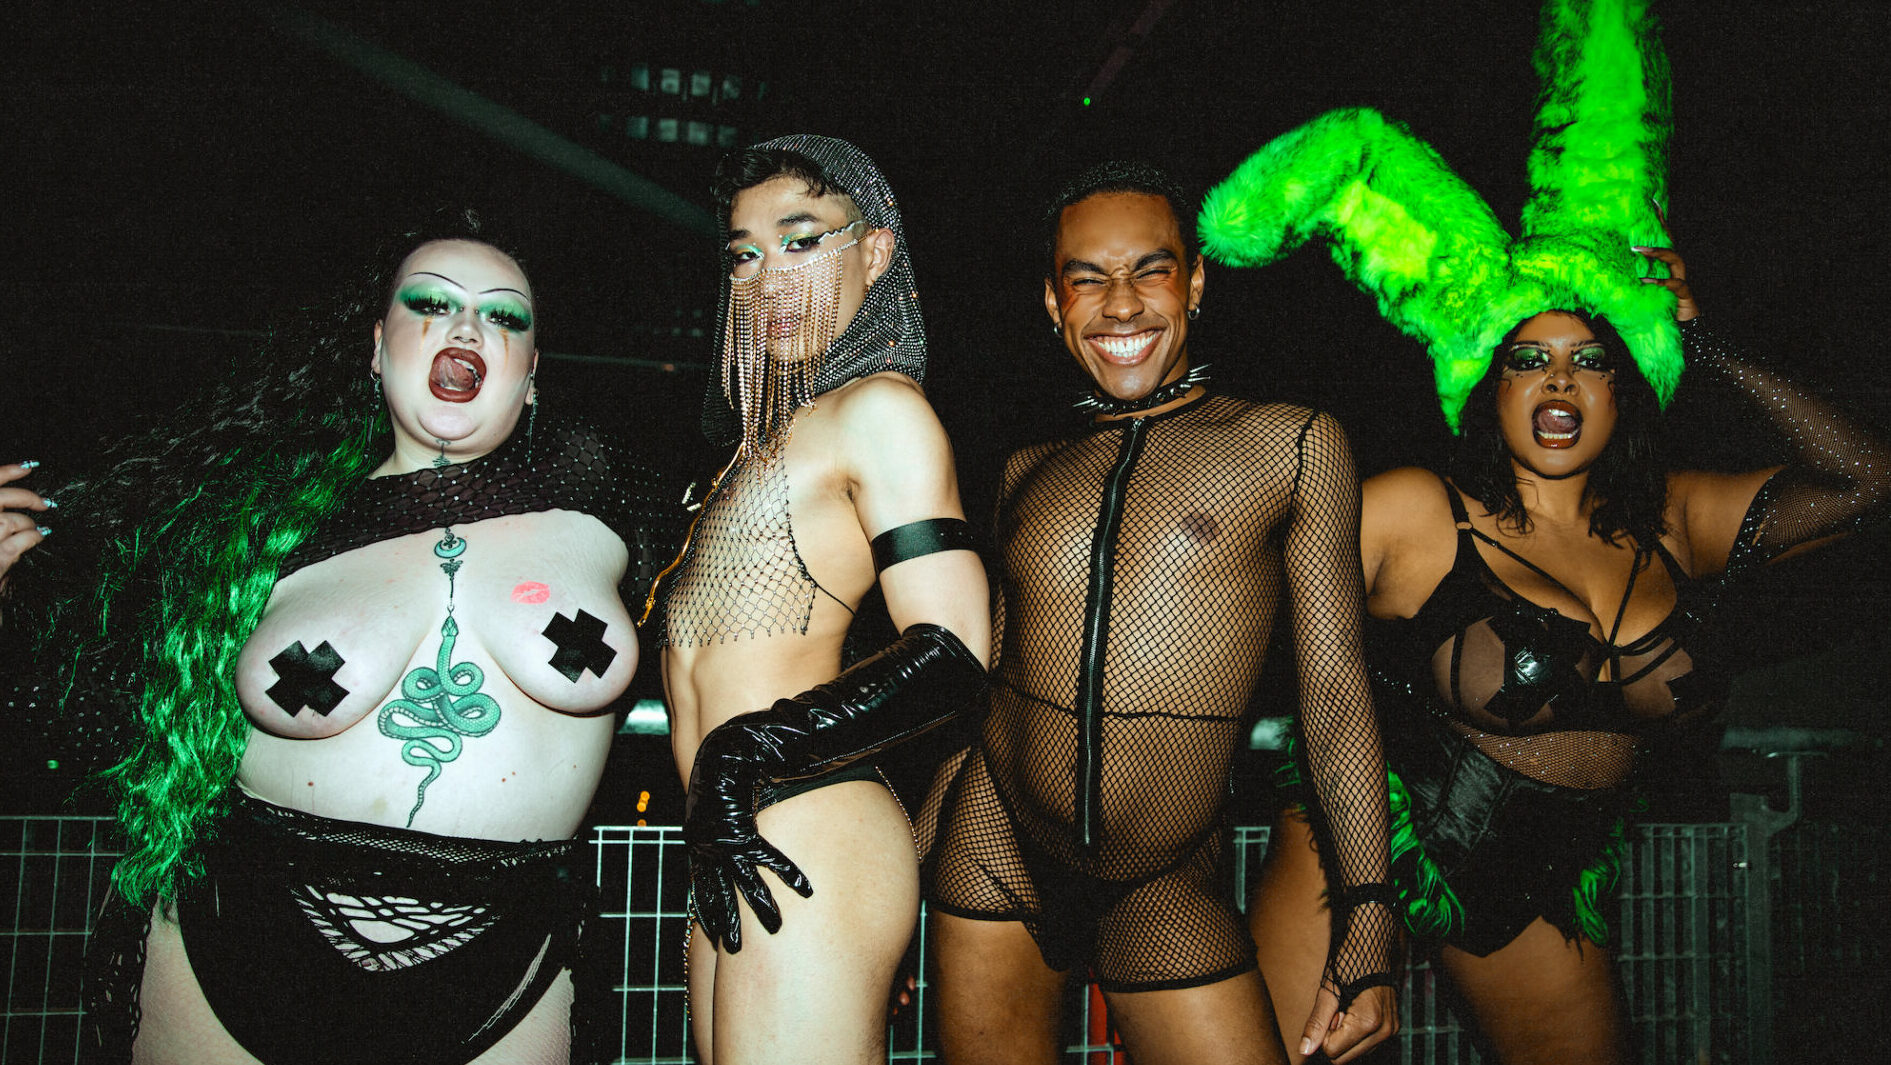 Four party-goers at False Idols show off their outfits